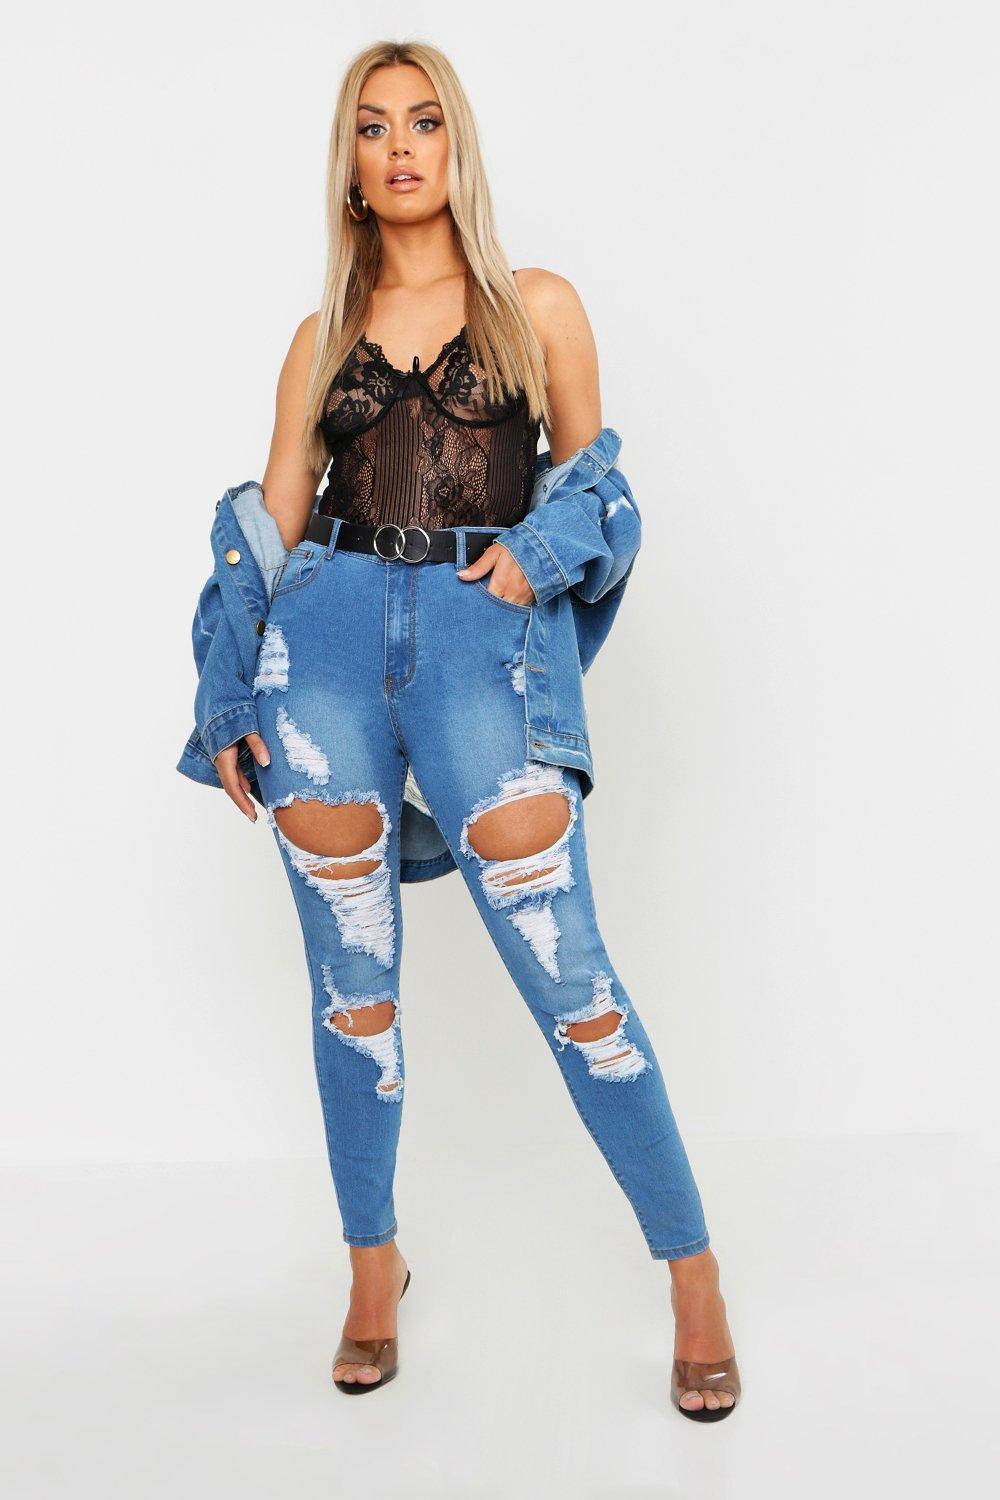  LAPA Women's Plus Size Skinny Denim Jeans, High Waisted Blue Distressed  Ripped Pants : Clothing, Shoes & Jewelry